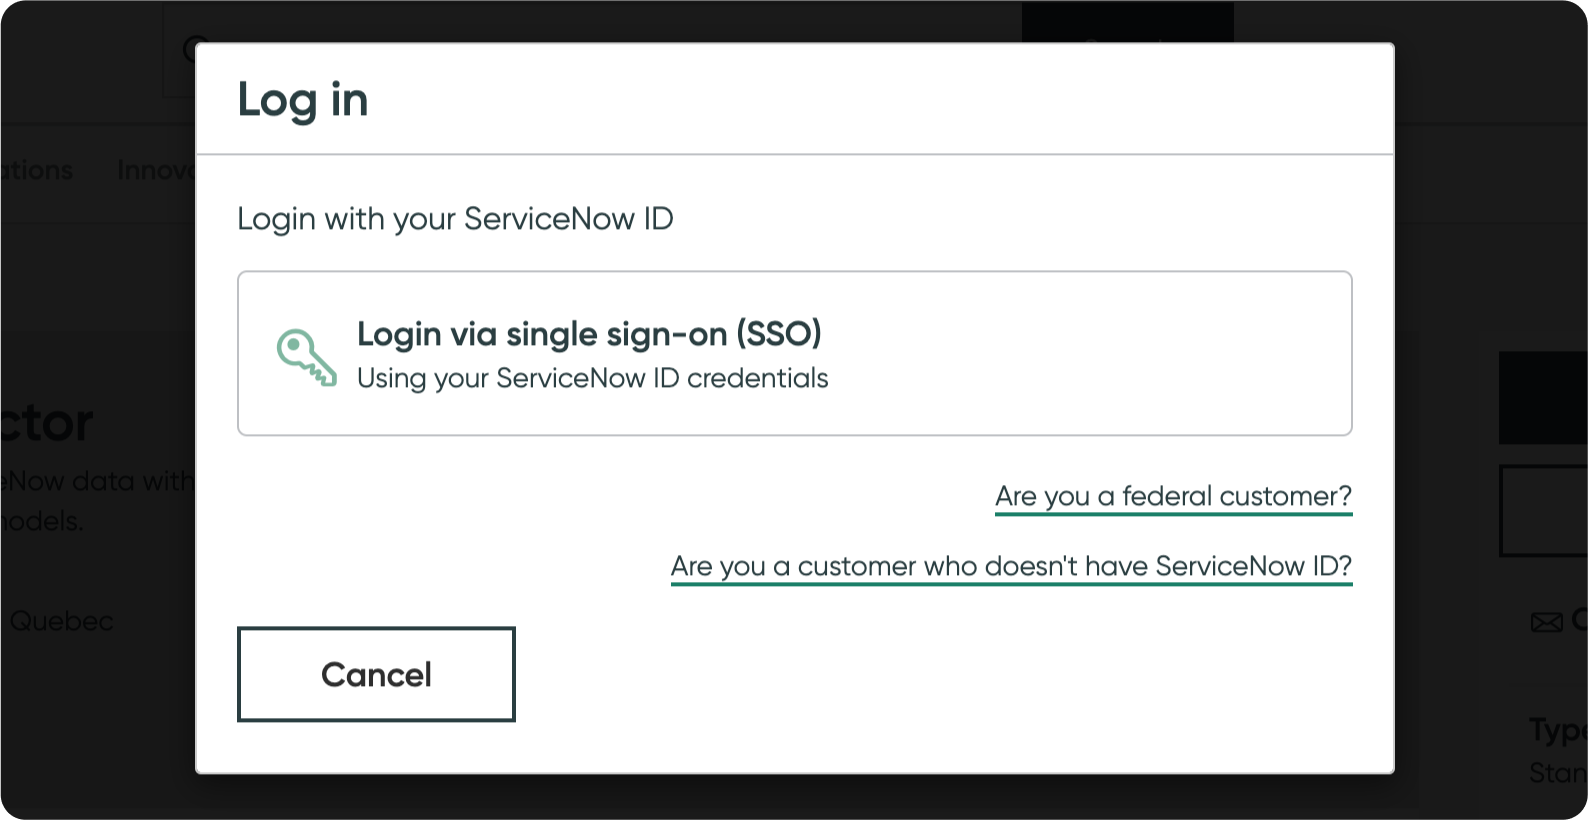 Log in With Your ServiceNow ID